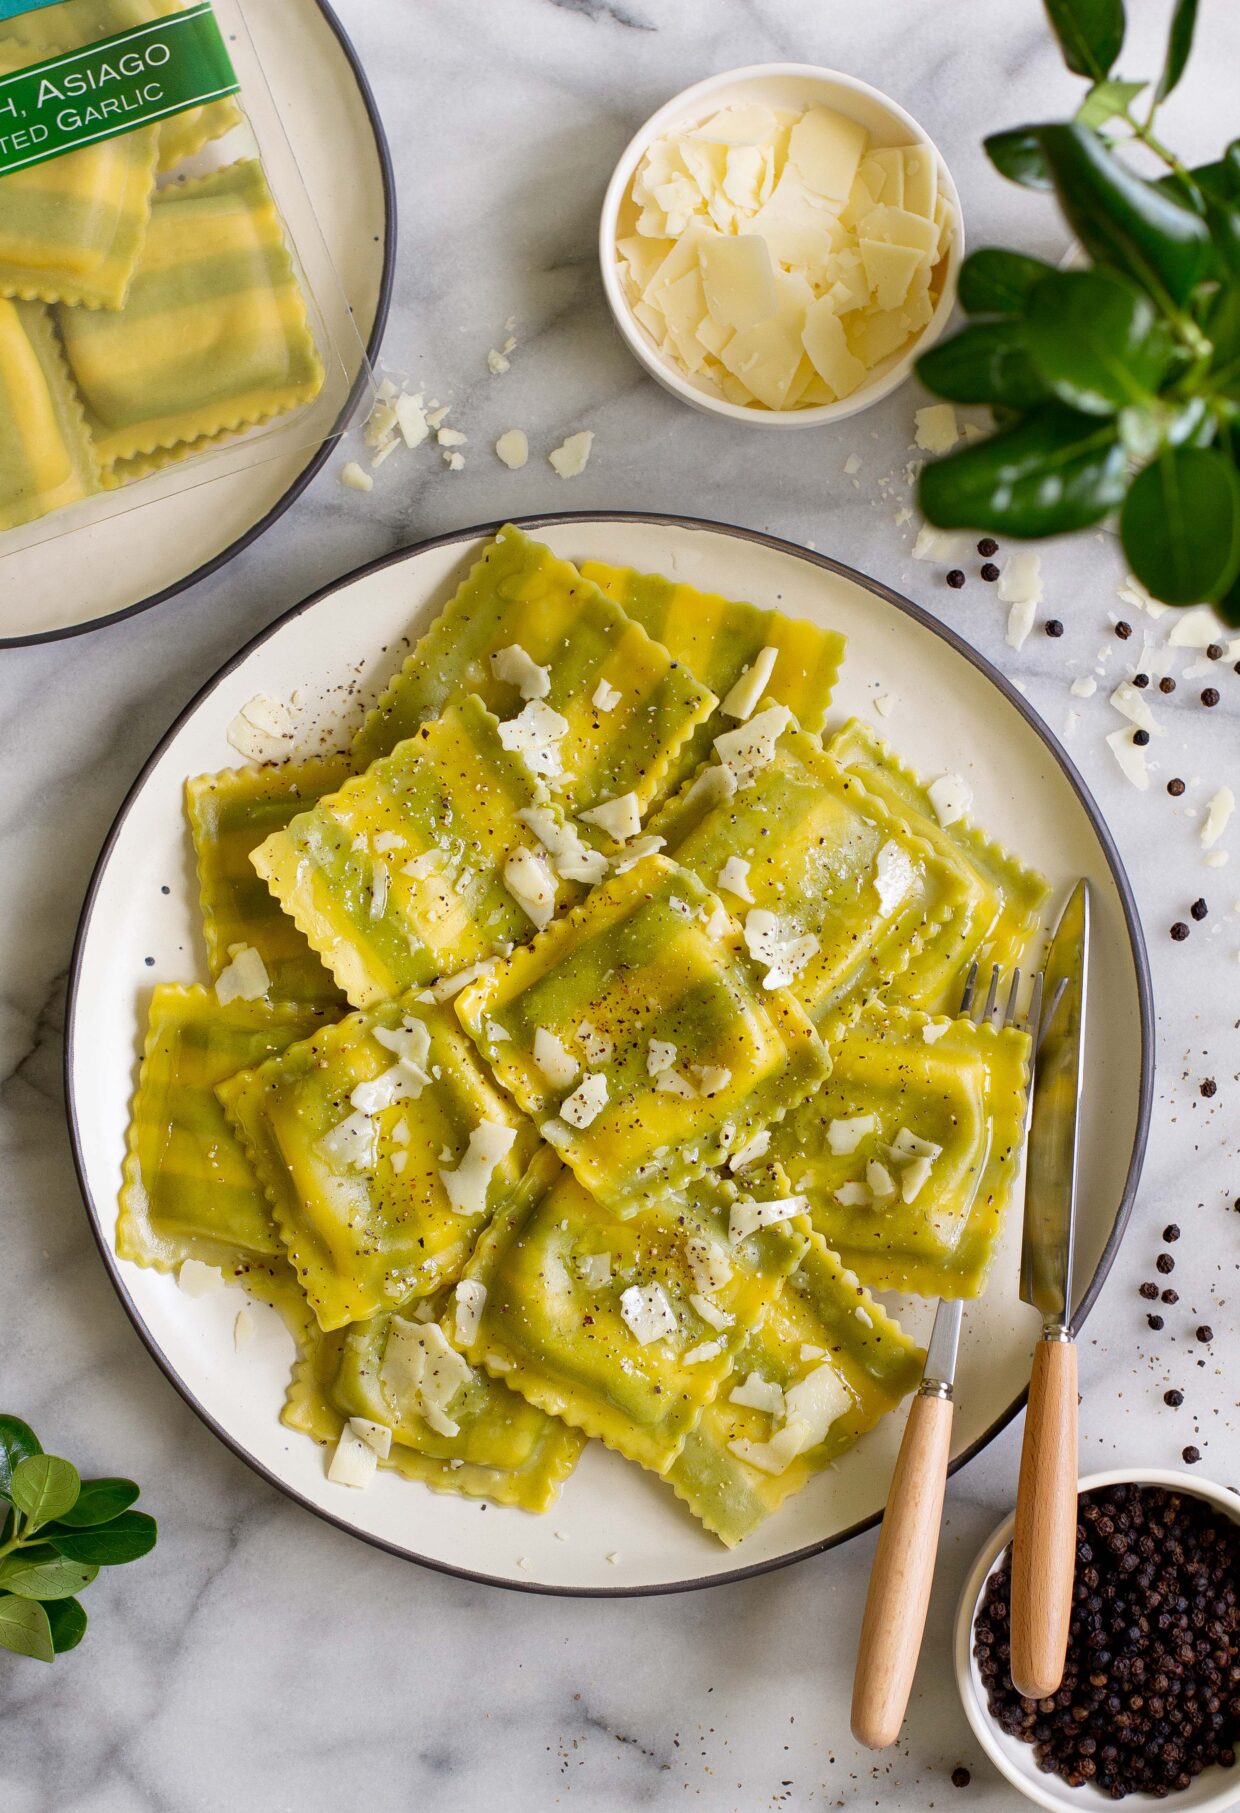 Spinach, Asiago & Roasted Garlic Ravioli with Olive Oil and Shaved Asiago